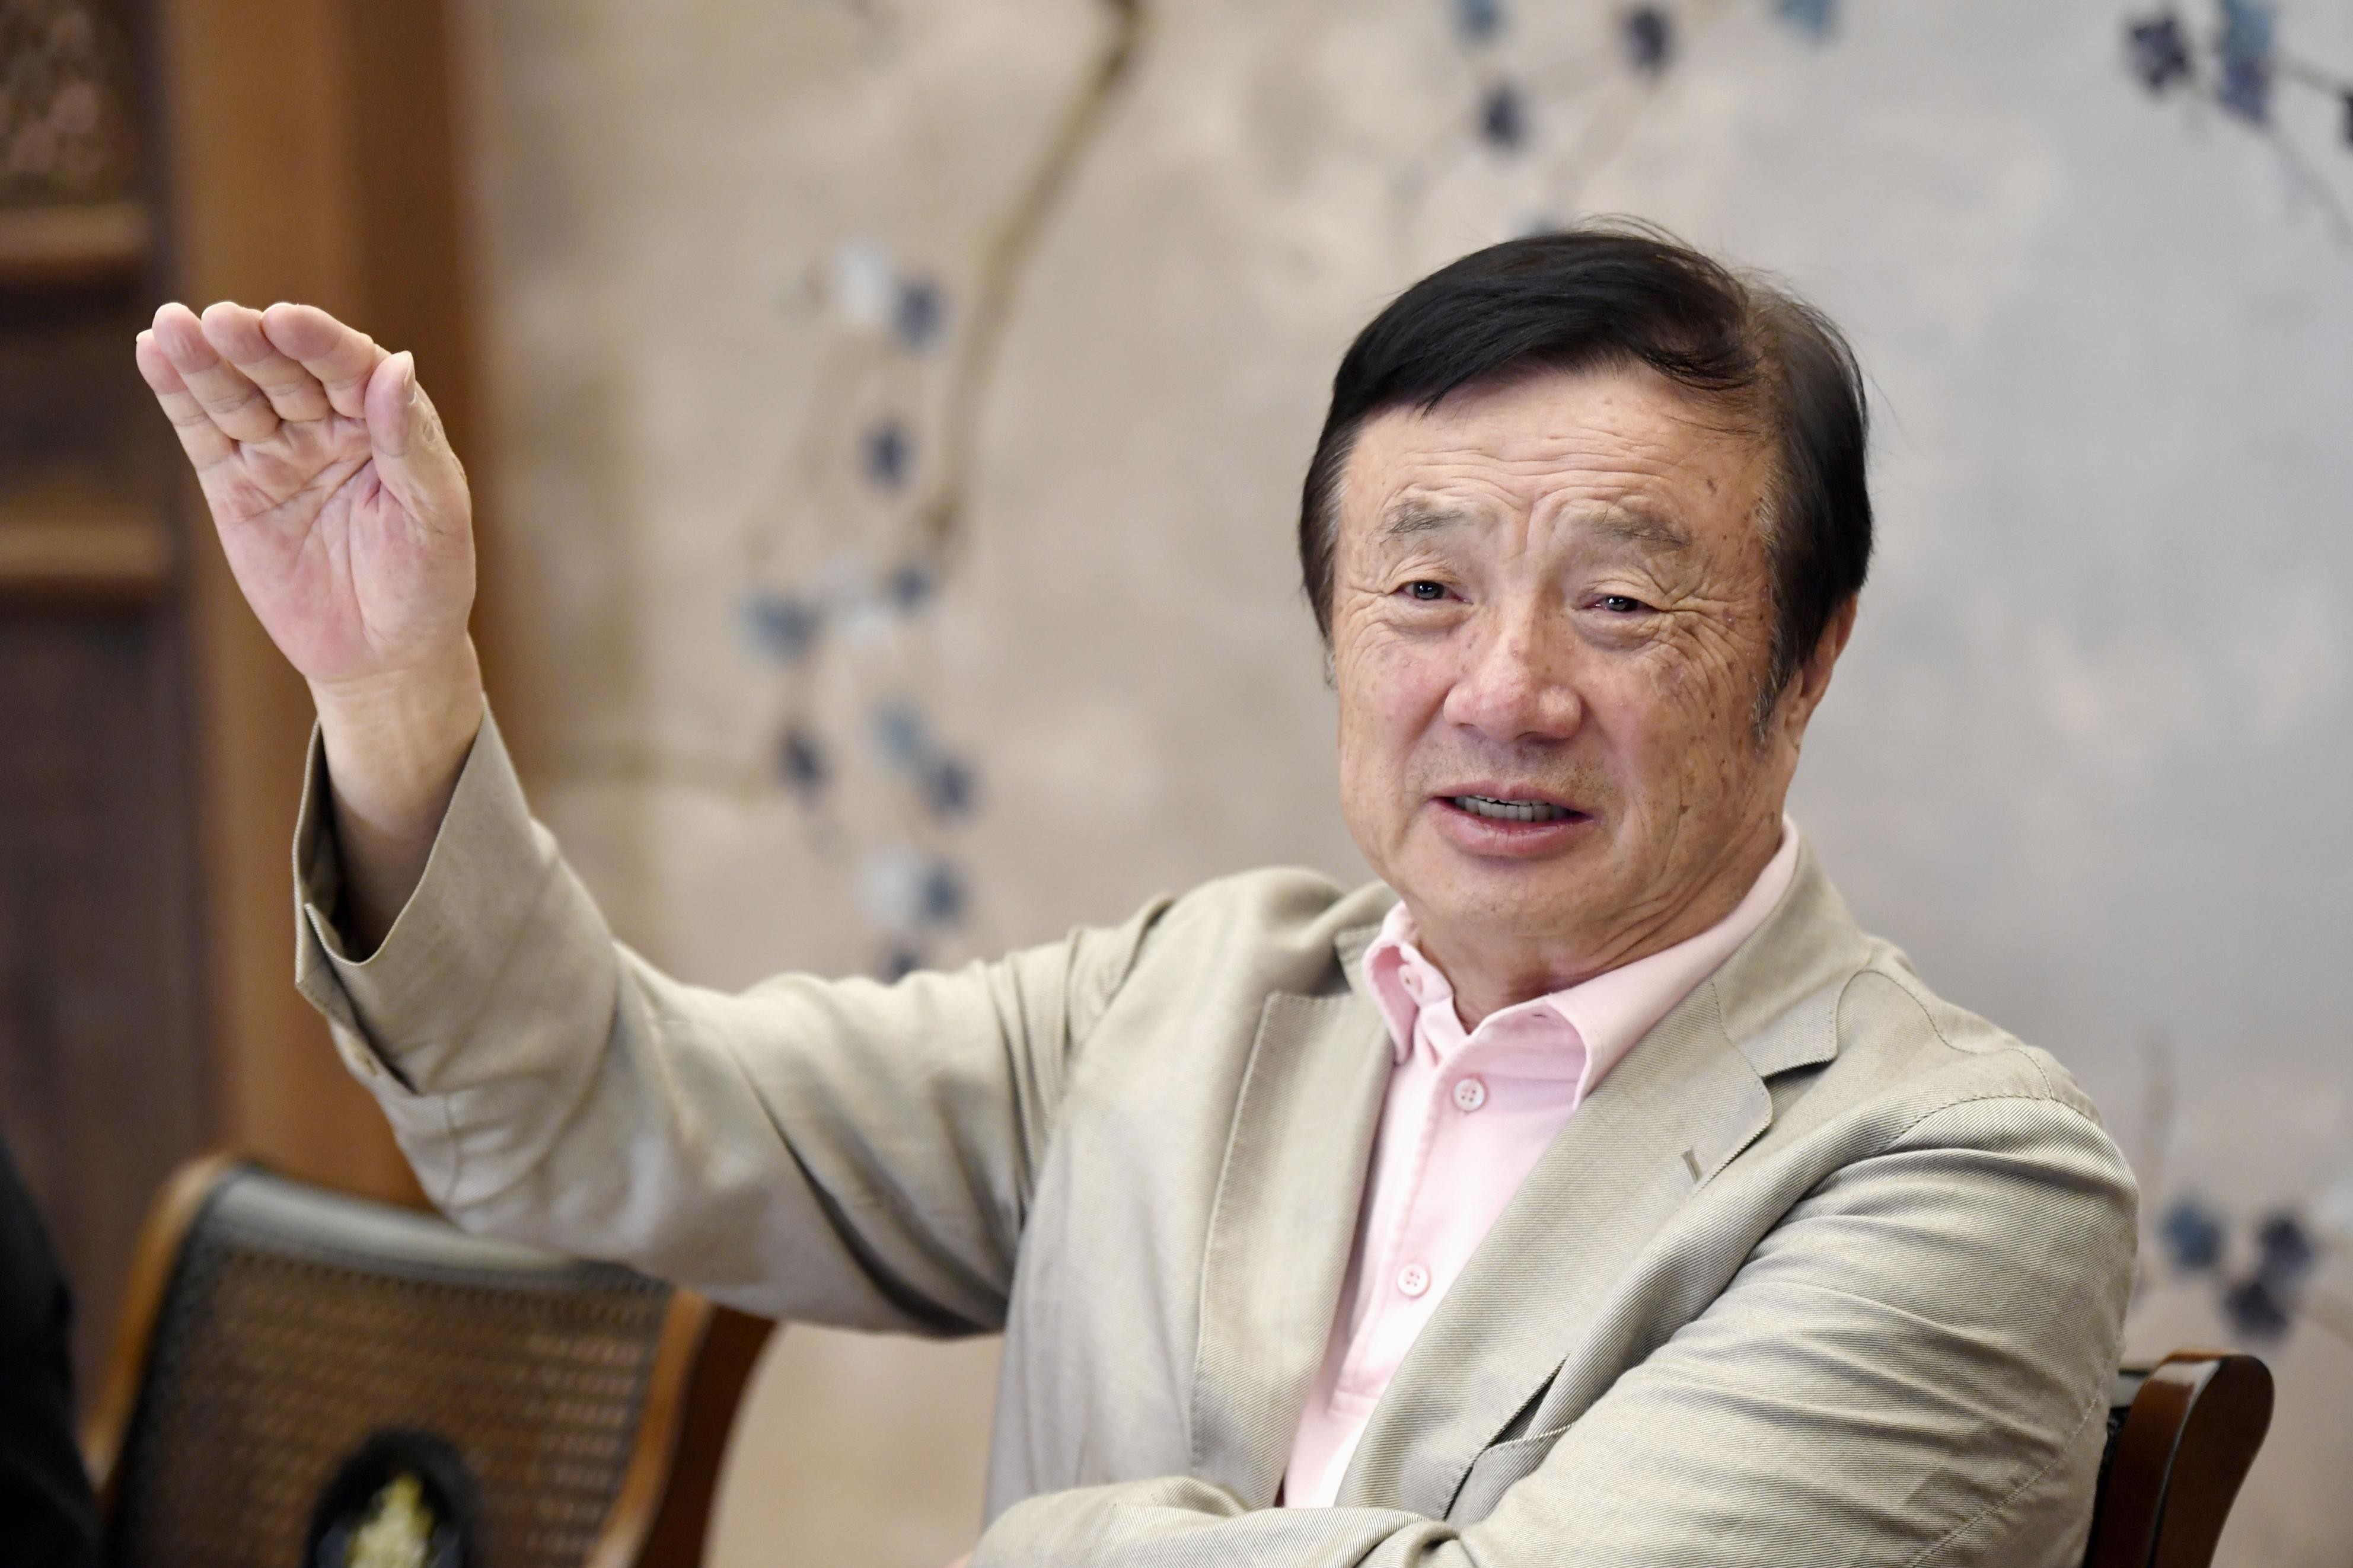 Ren Zhengfei, founder and chief executive of Huawei Technologies, wants hi-tech companies in Japan and Europe to step up and become alternative suppliers that would compete against the major US component providers. Photo: Kyodo